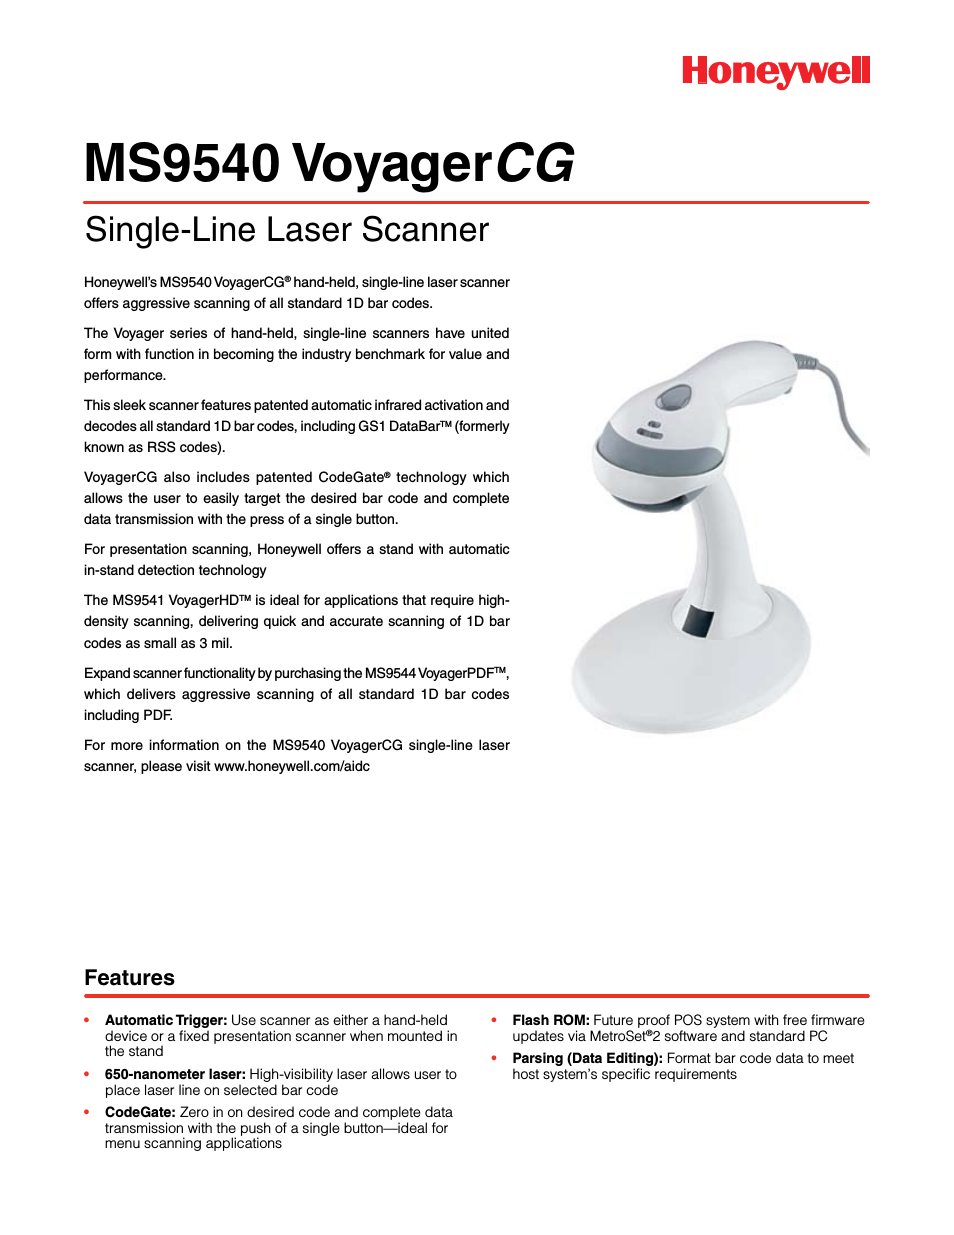 VoyagerCG MS9540